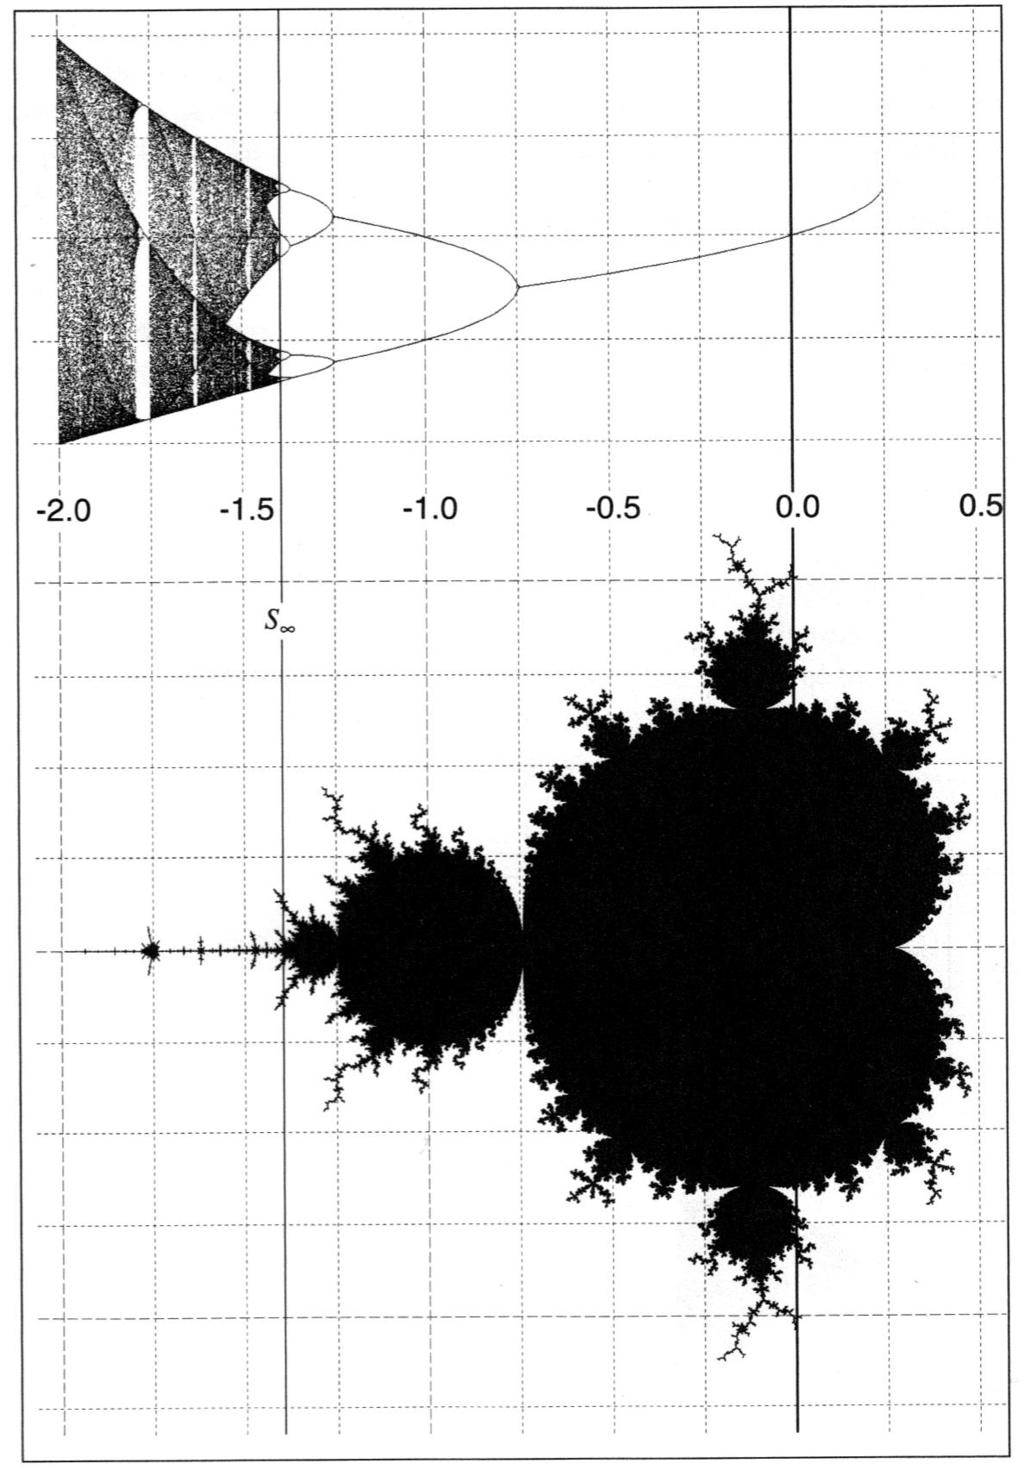 Relation of the Mandelbrot set with the